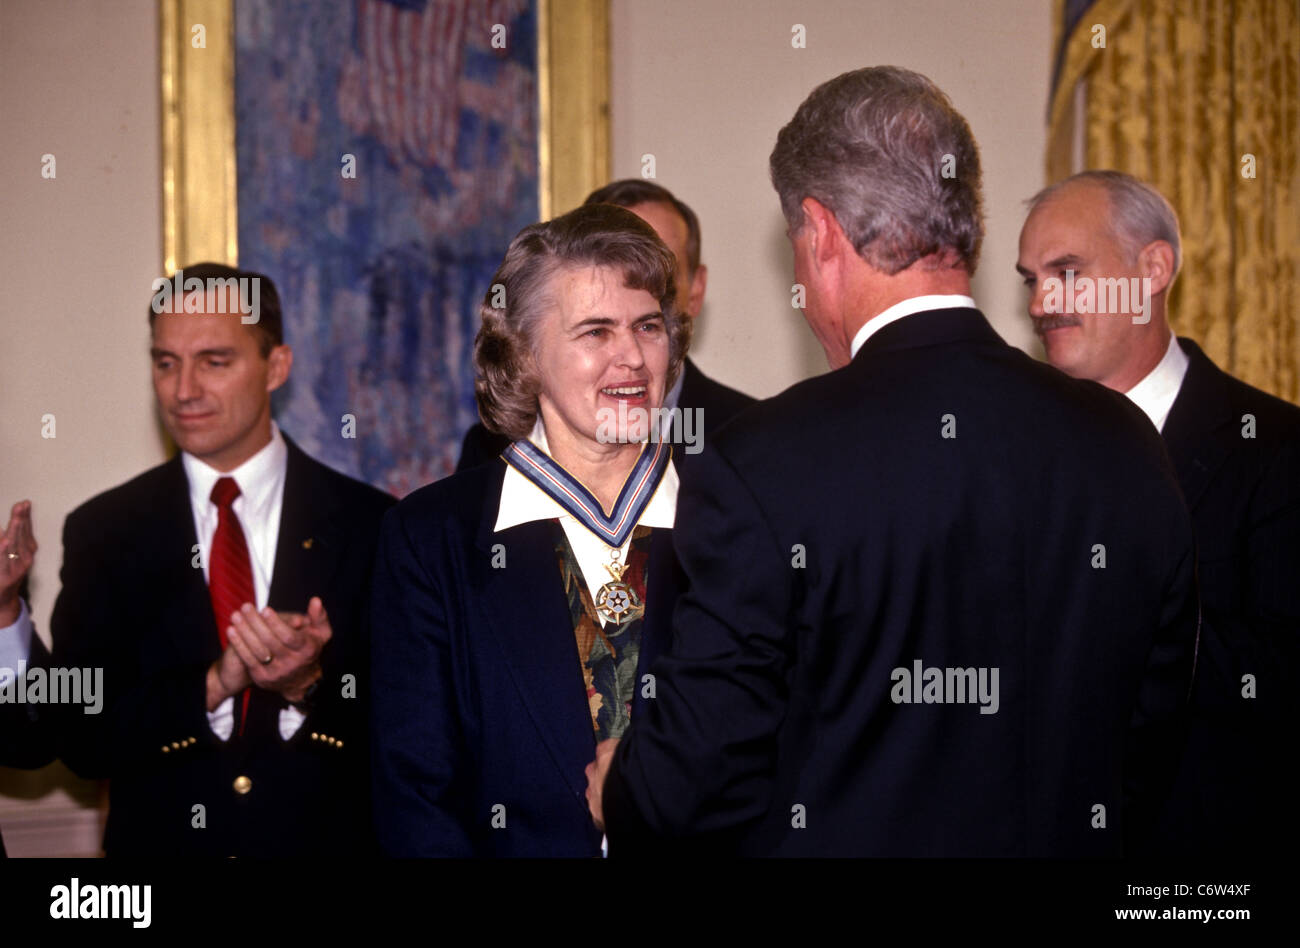 President Bill Clinton awards astronaut Dr. Shannon Lucid the Congressional Space Medal of Honor at the White House Stock Photo